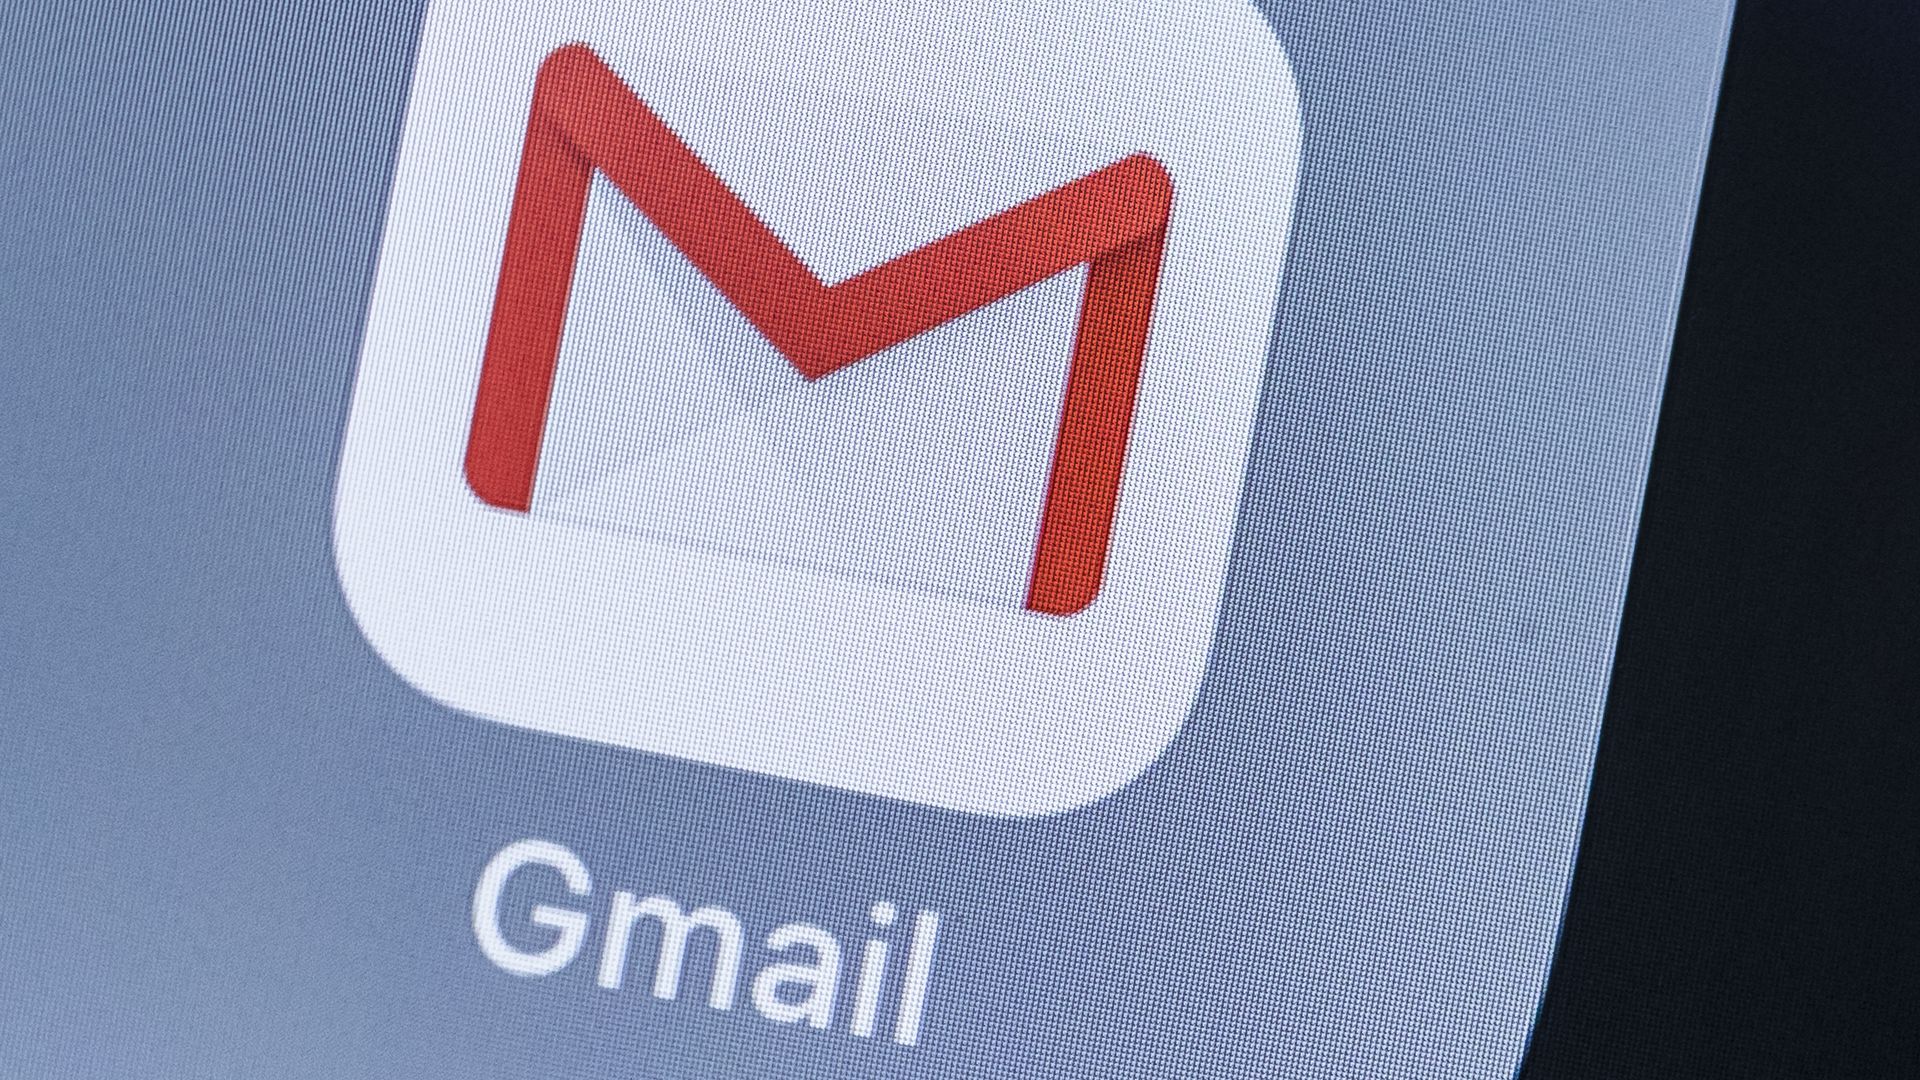 A smartphone icon for Google's Gmail application.